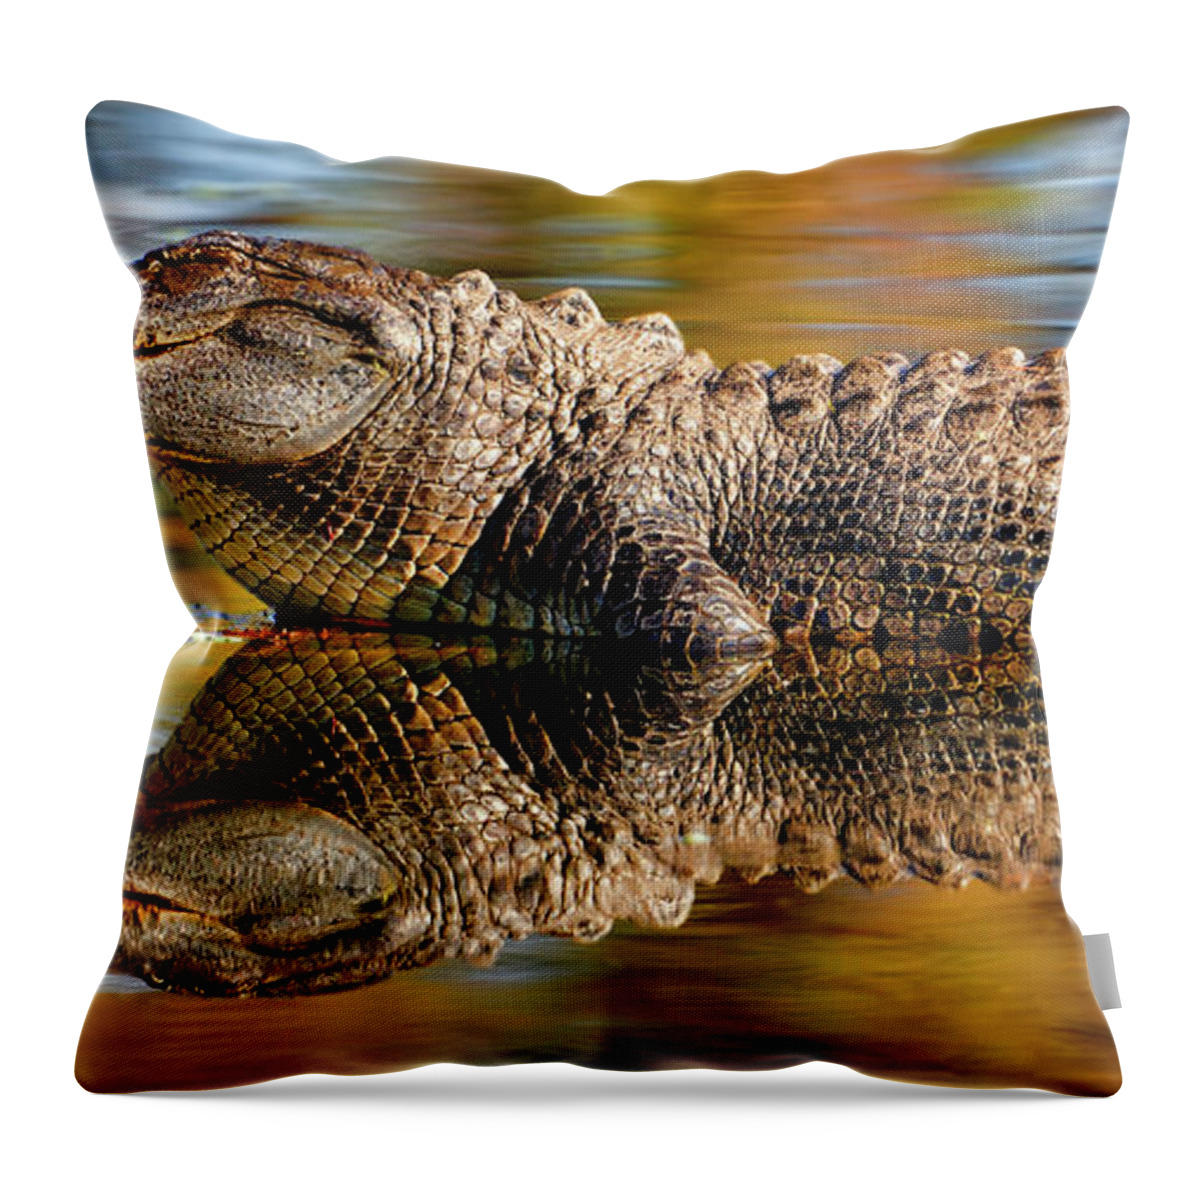 Reflection Throw Pillow featuring the photograph Relection of an Alligator by Bill Dodsworth